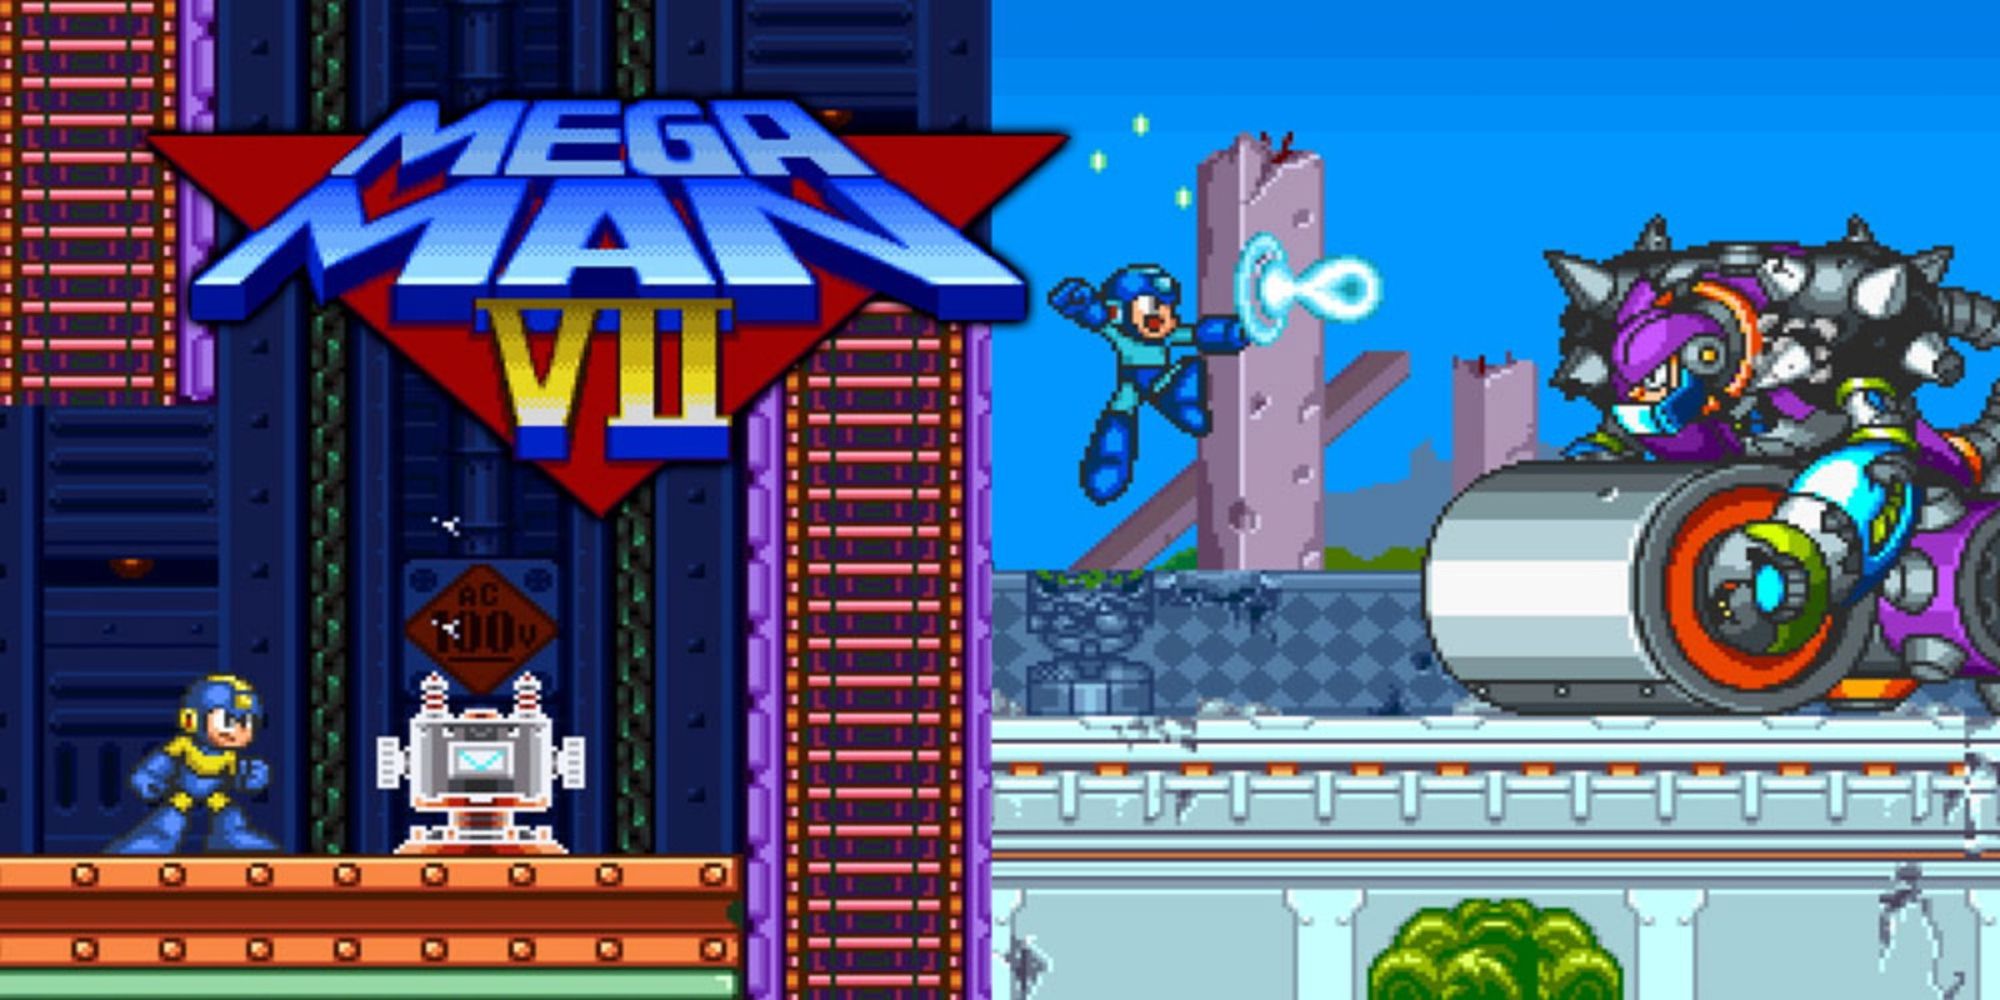 Games With Short Development Times a 2D side shot of gameplay from Mega Man 7 with the game's logo in the top left and Mega Man shooting Mad Grinder on the right